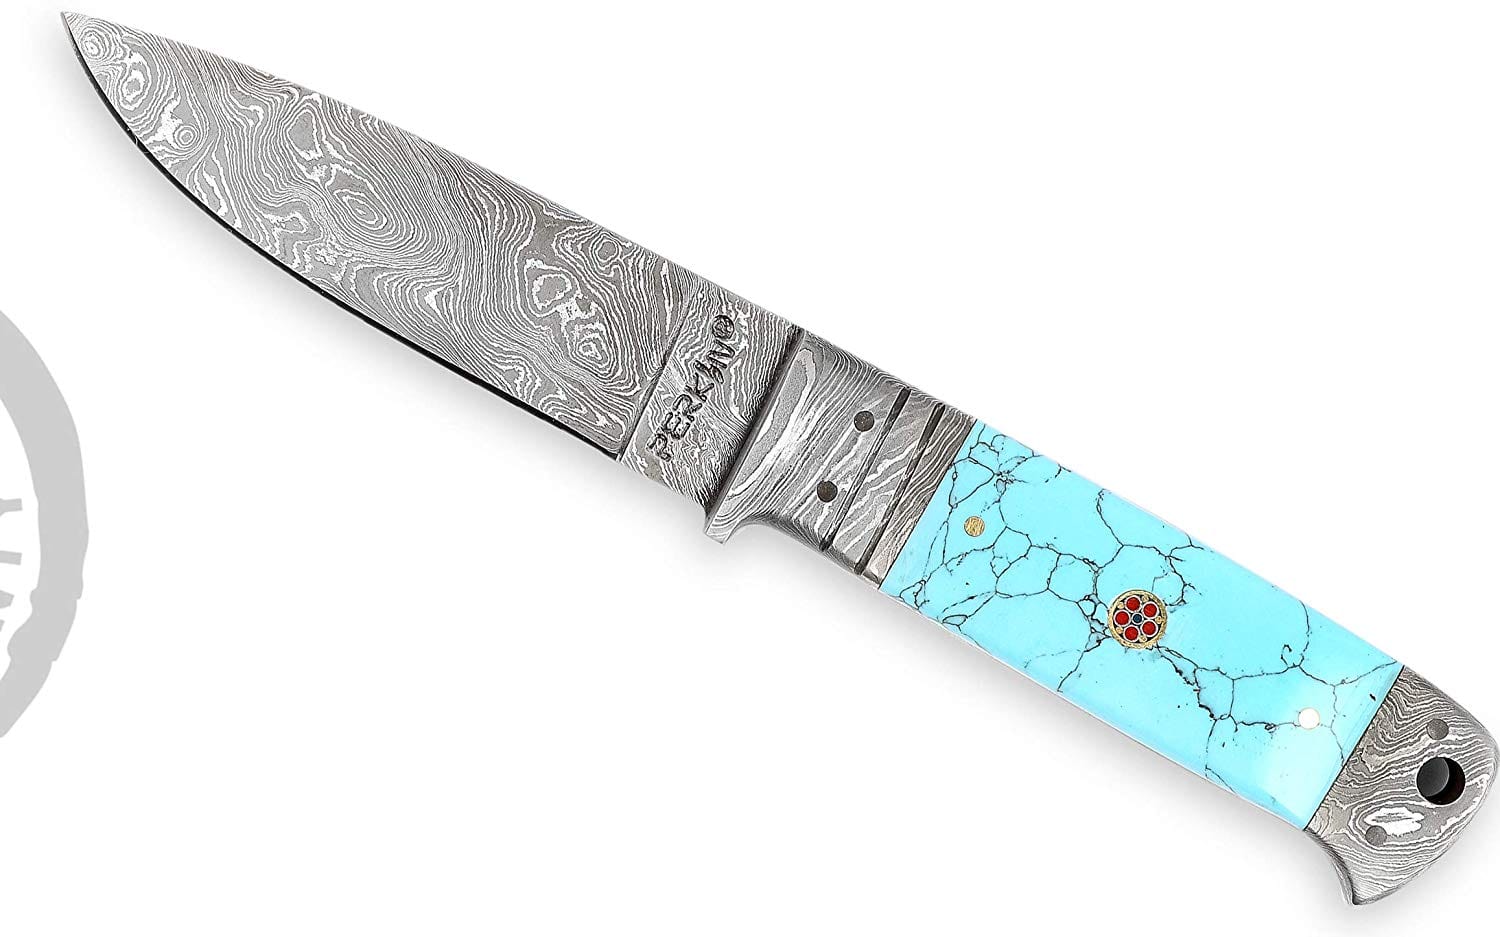 The Ultimate All-Purpose Damascus Knife - 9.0 inches